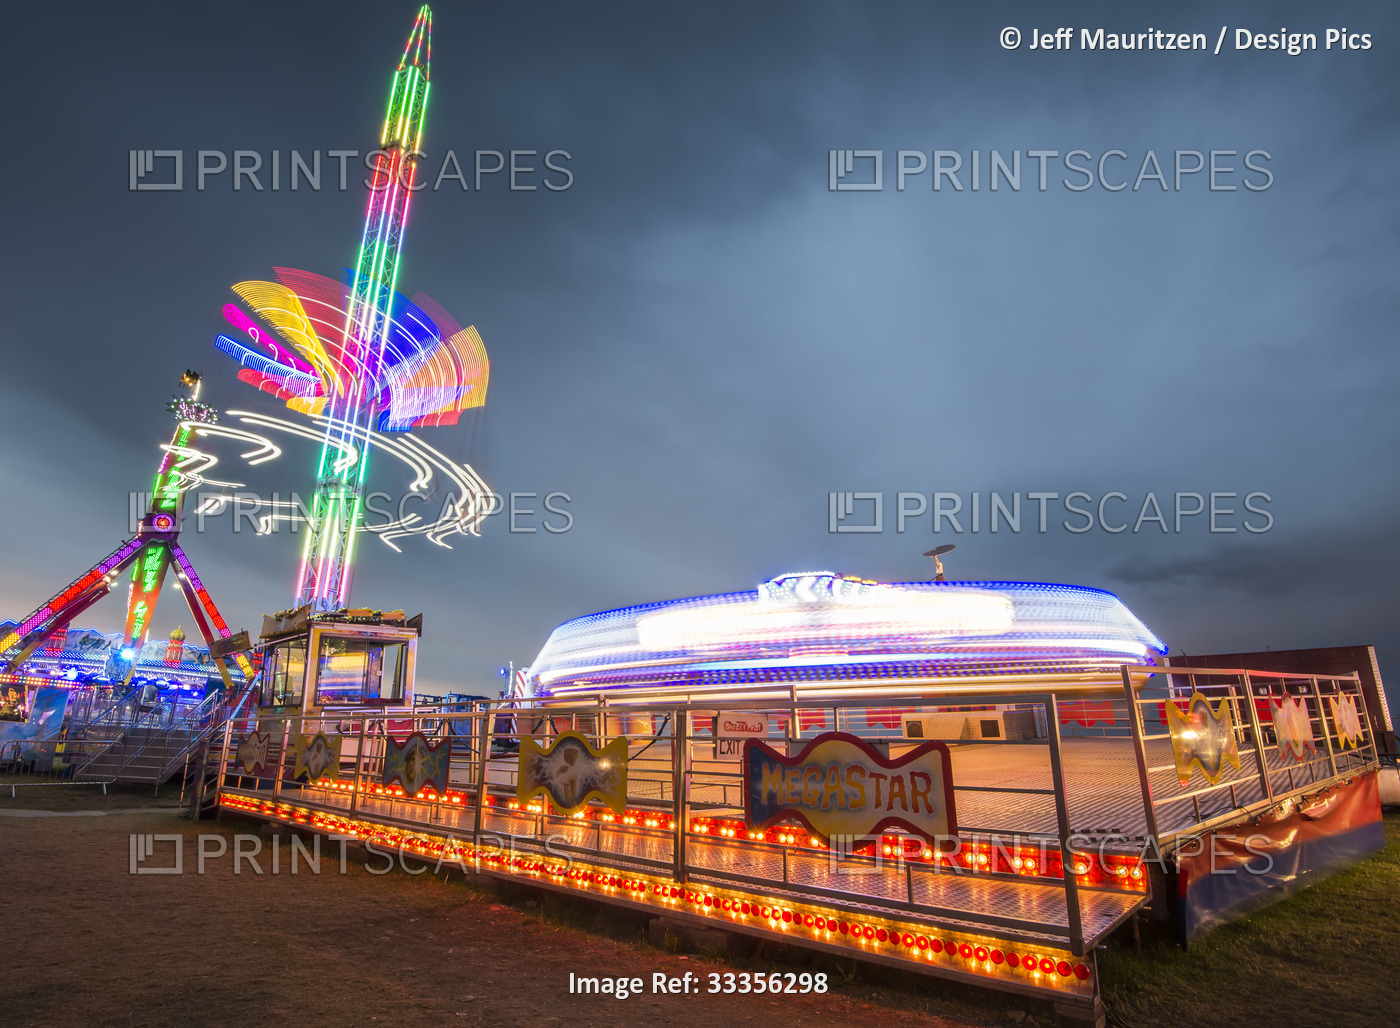 The carnival fun rides lit up at night; Bray, County Wicklow, Ireland